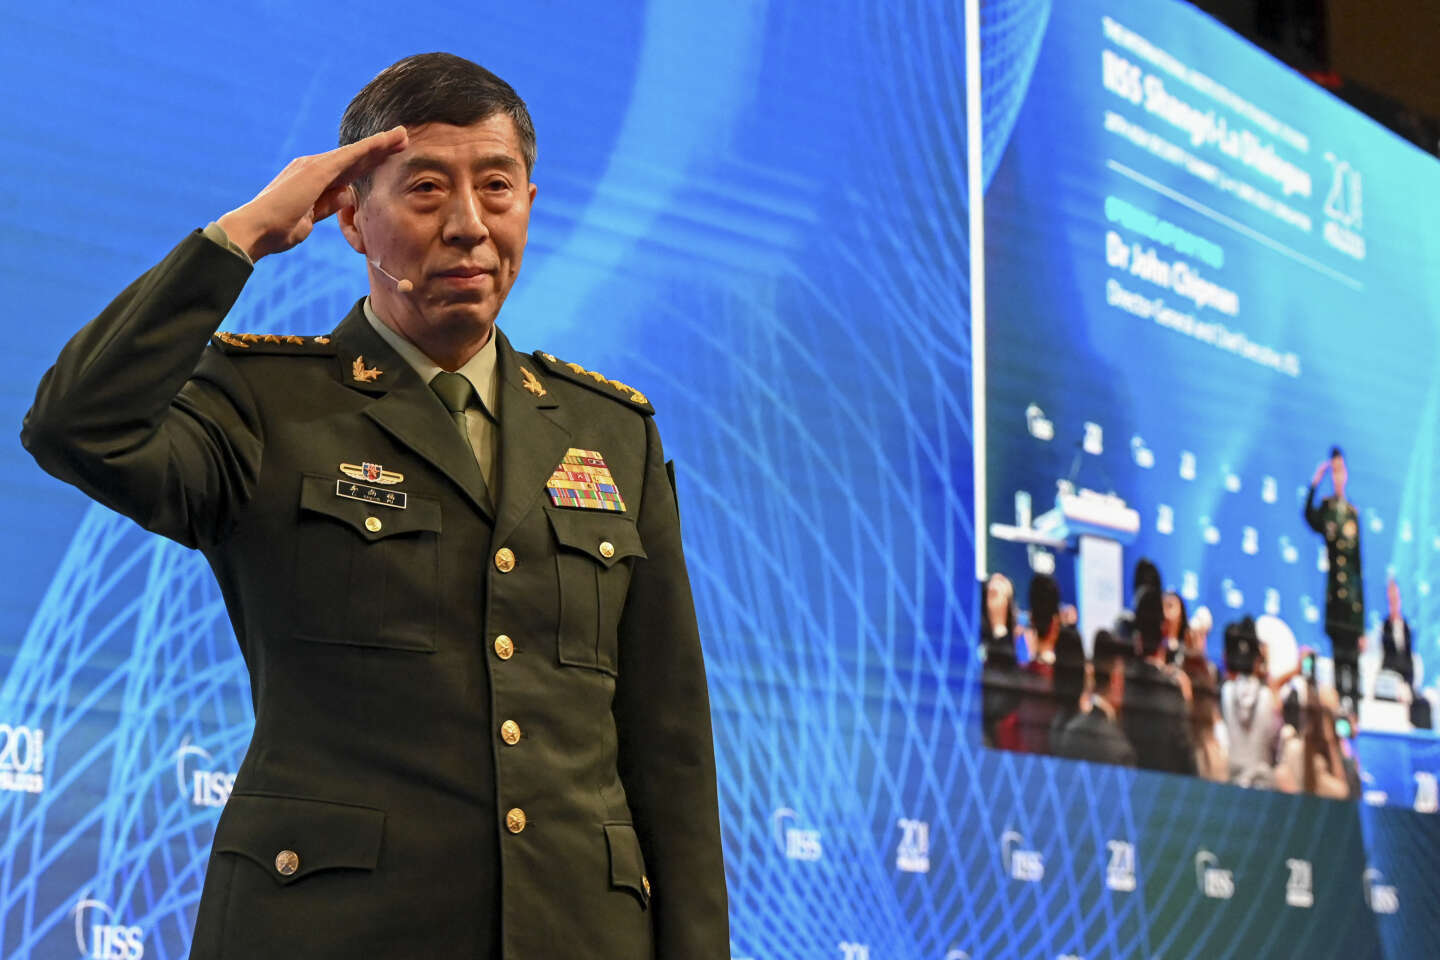 Four months after Li Shangfu's disappearance, China appointed a new defense minister